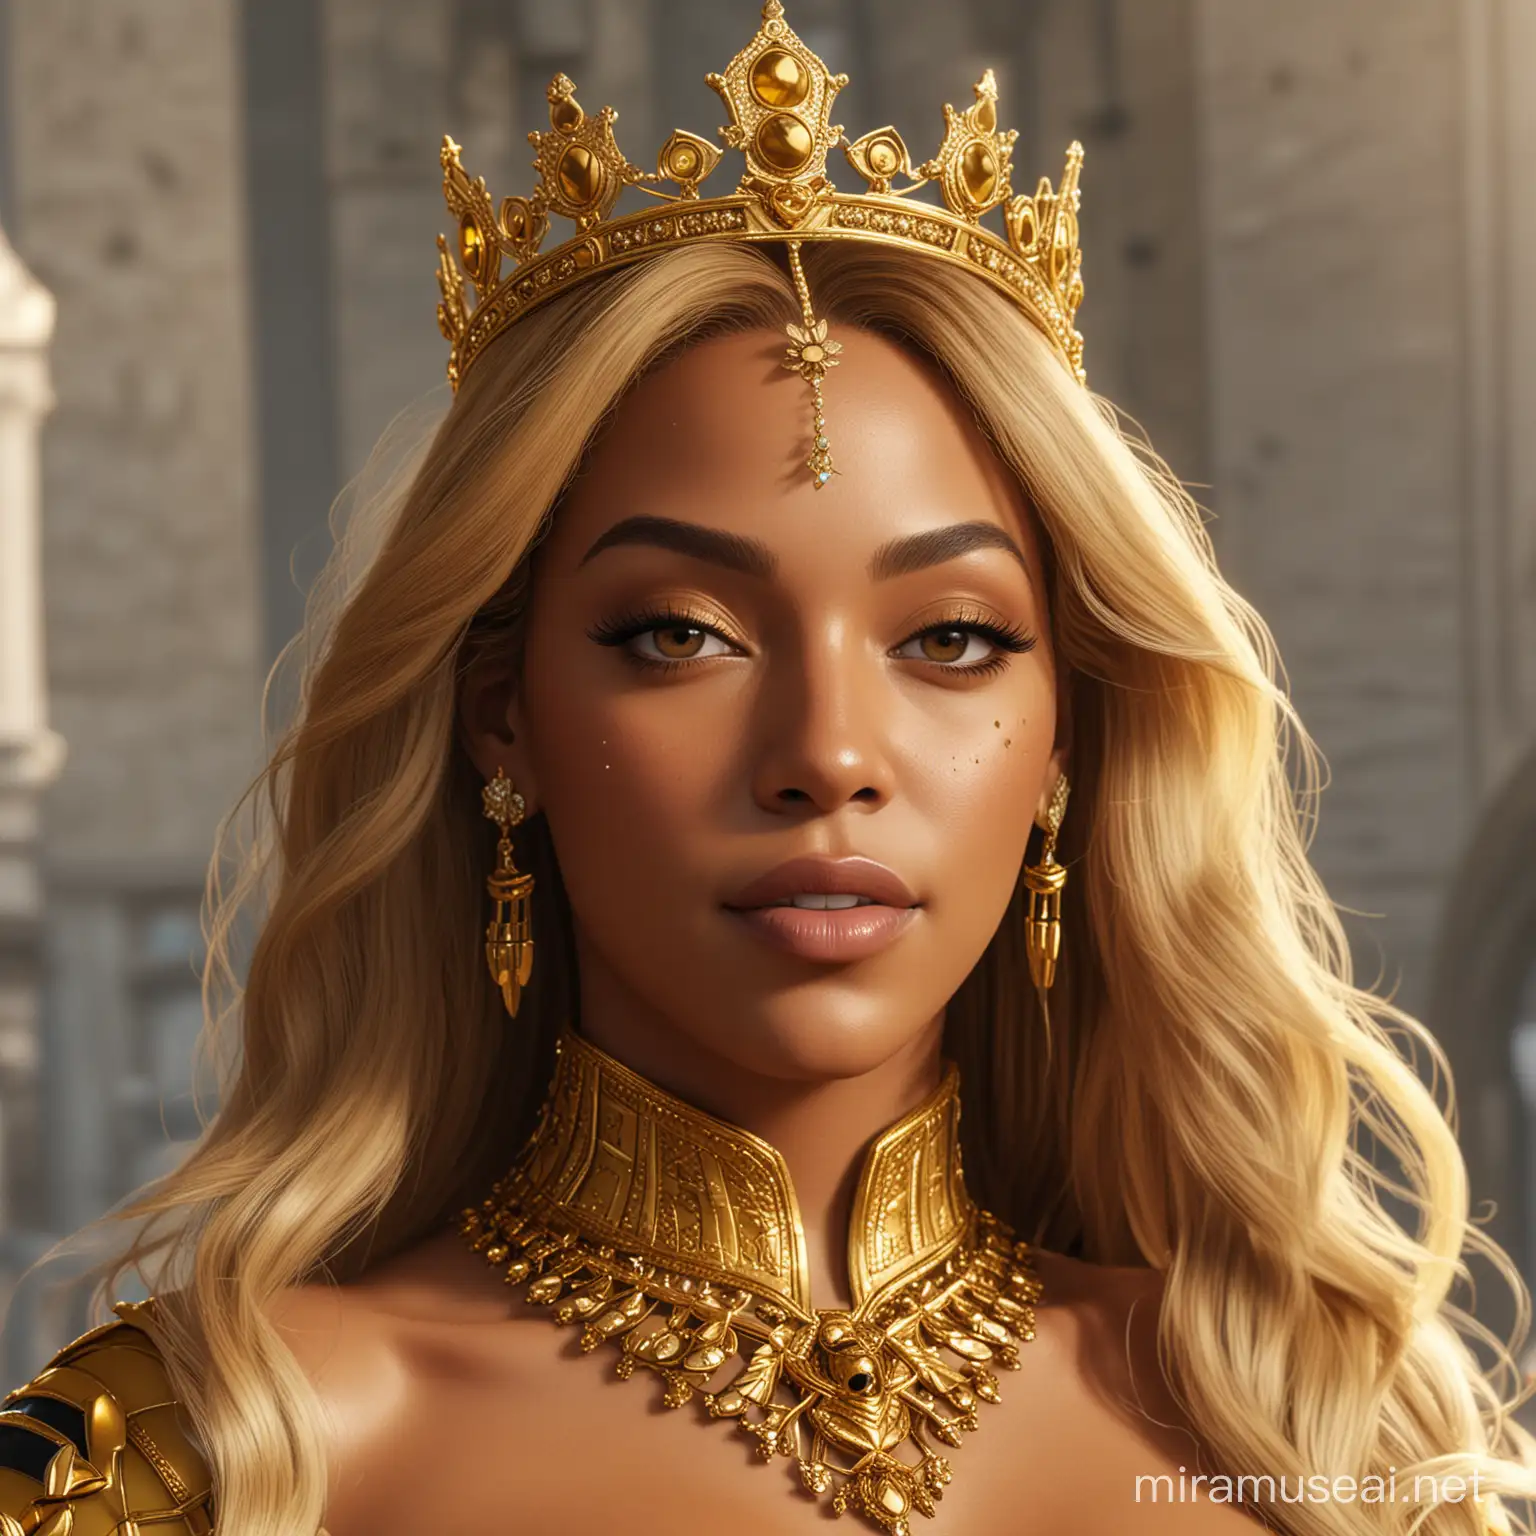 Queen Bee DC Comics, Beyonce as Queen Bee,Comic accurate, 8K, highly detailed, realistic, Beyonce as Queen of Bialya, Young Justice, wearing a golden tiara